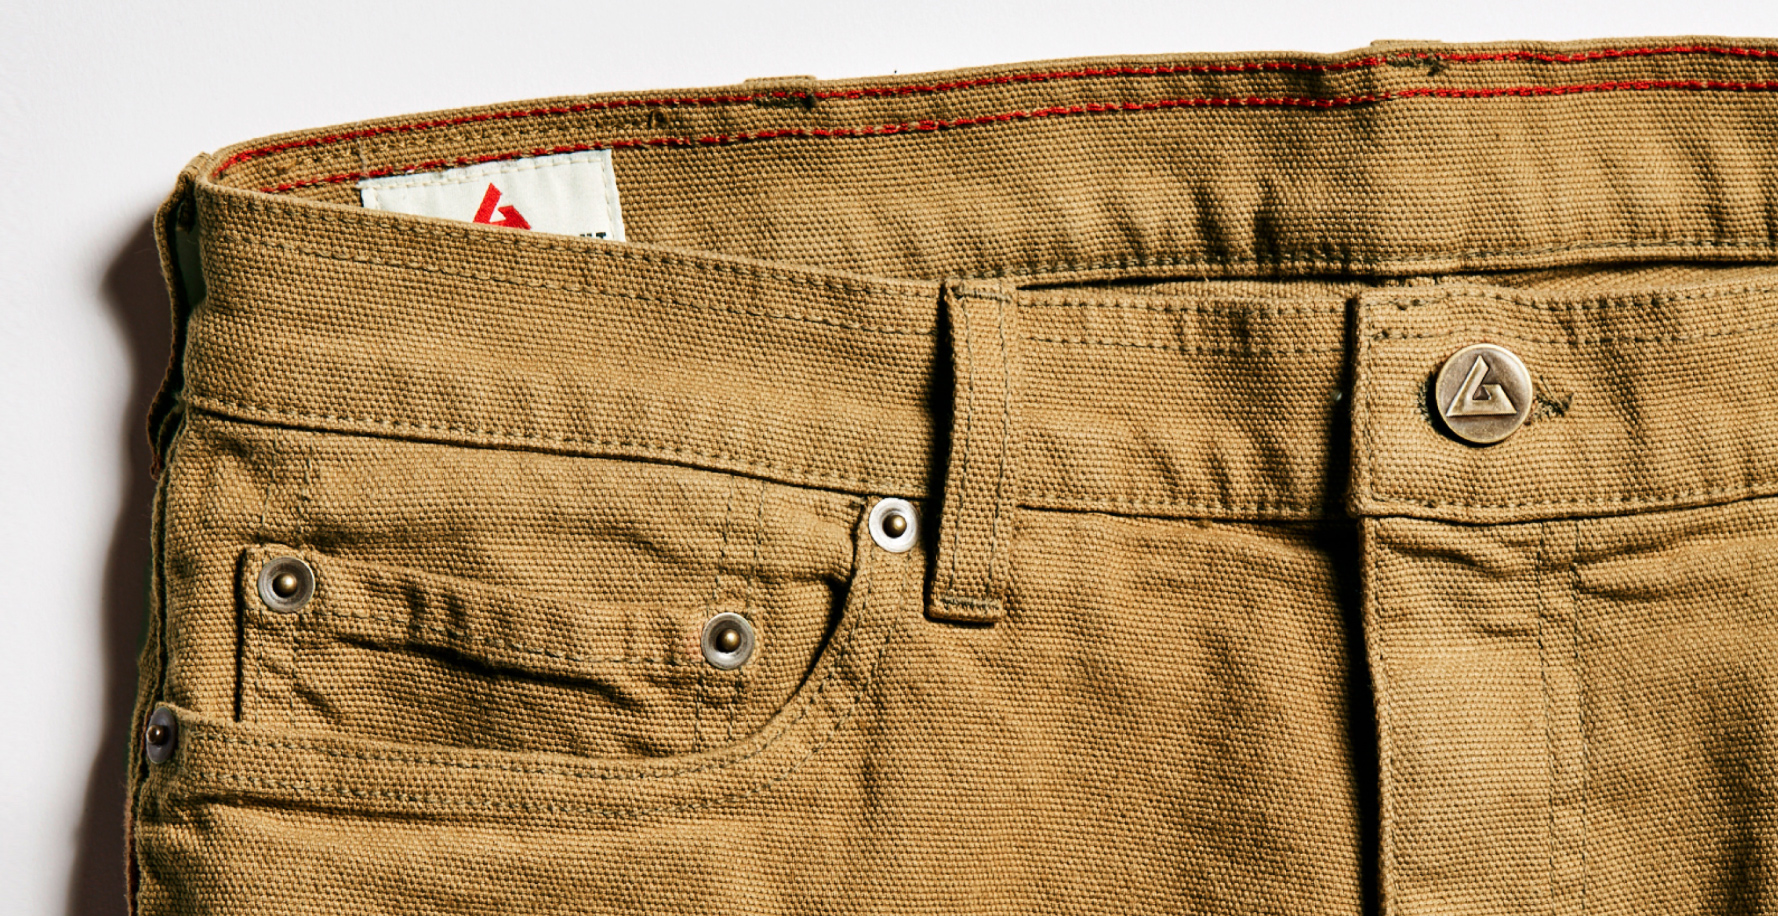 Roughneck Pant – The Gear Journal